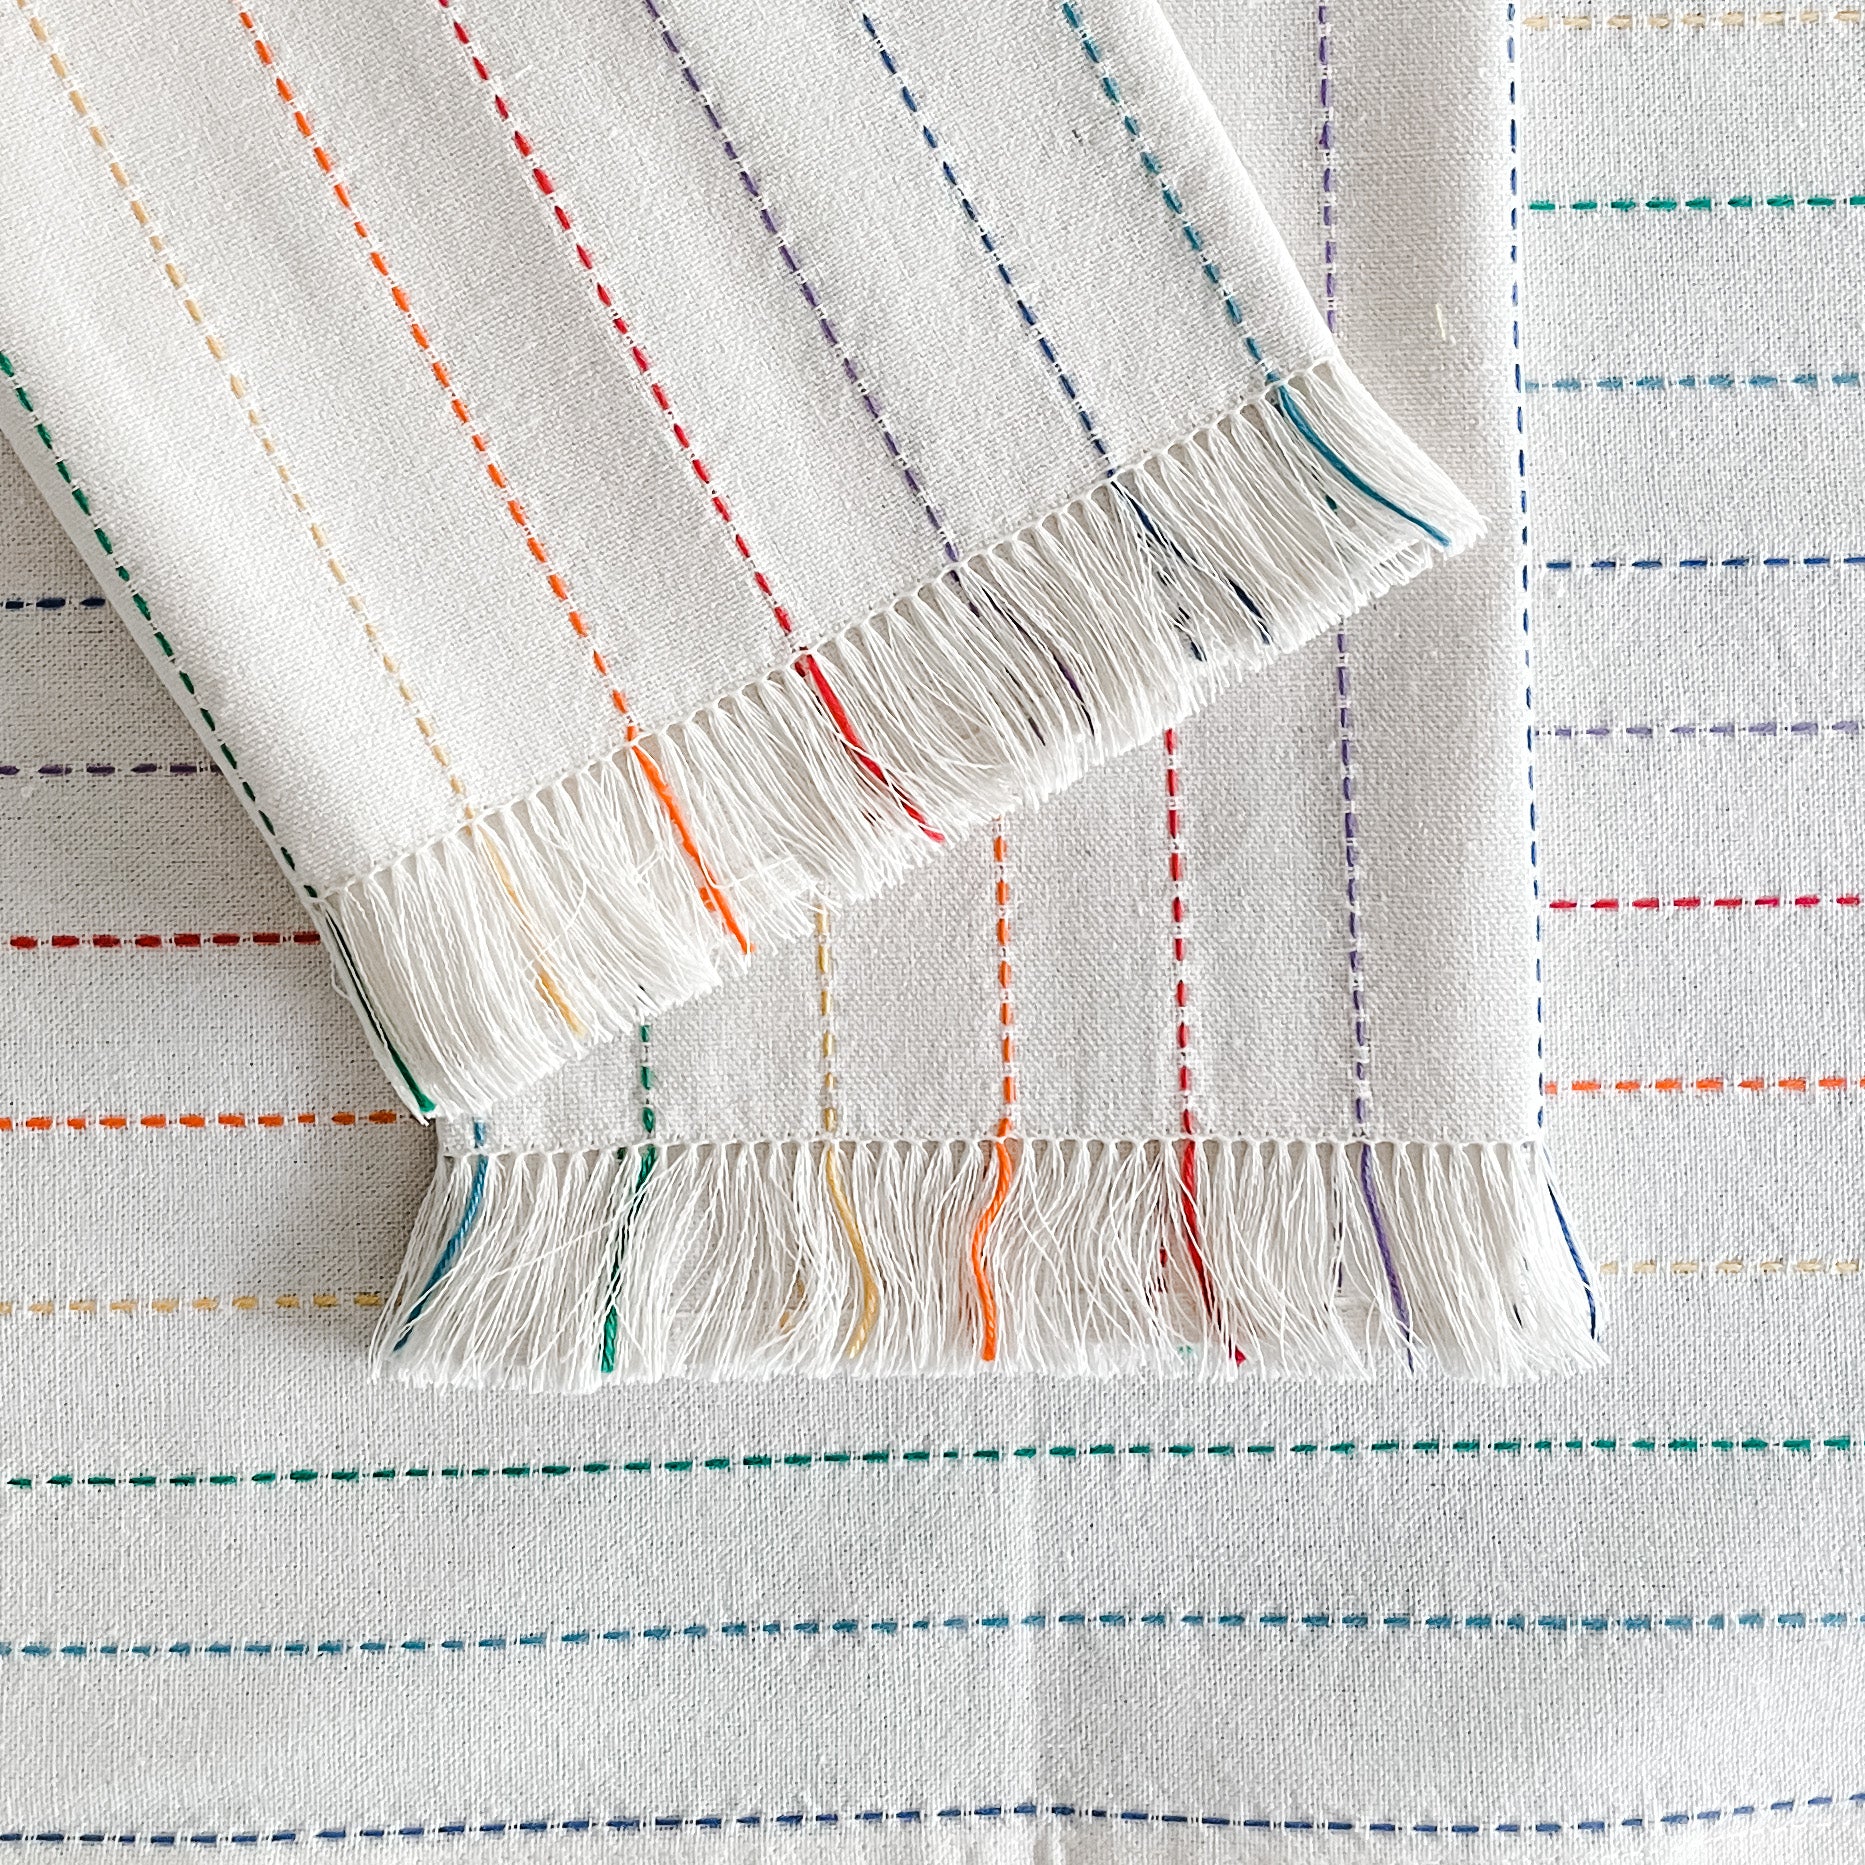 Hand-Stitched Table Runner